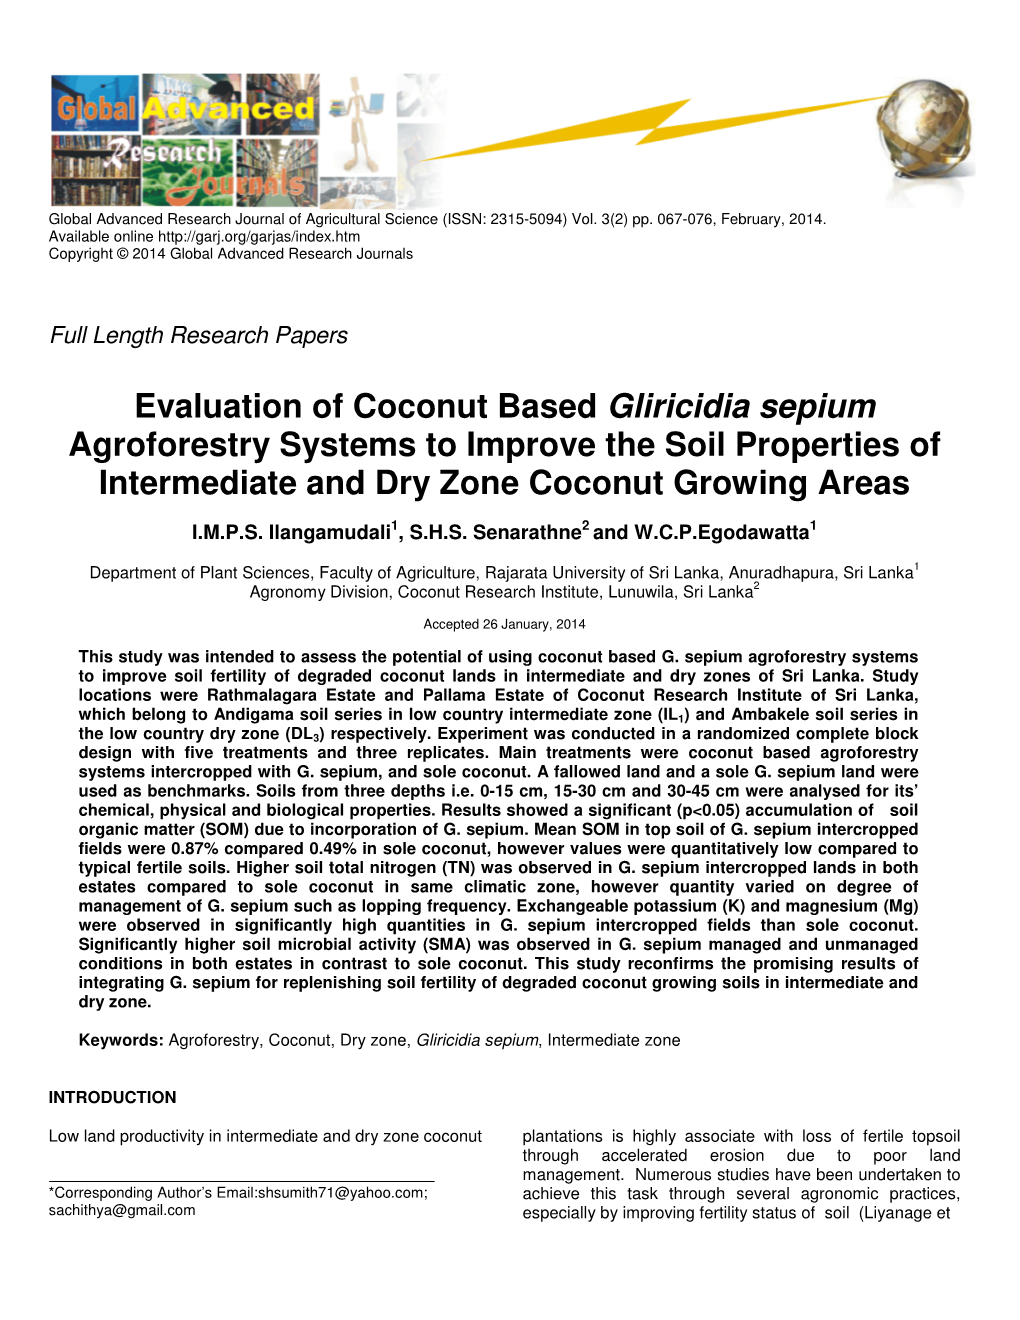 Evaluation of Coconut Based Gliricidia Sepium Agroforestry Systems to Improve the Soil Properties of Intermediate and Dry Zone Coconut Growing Areas